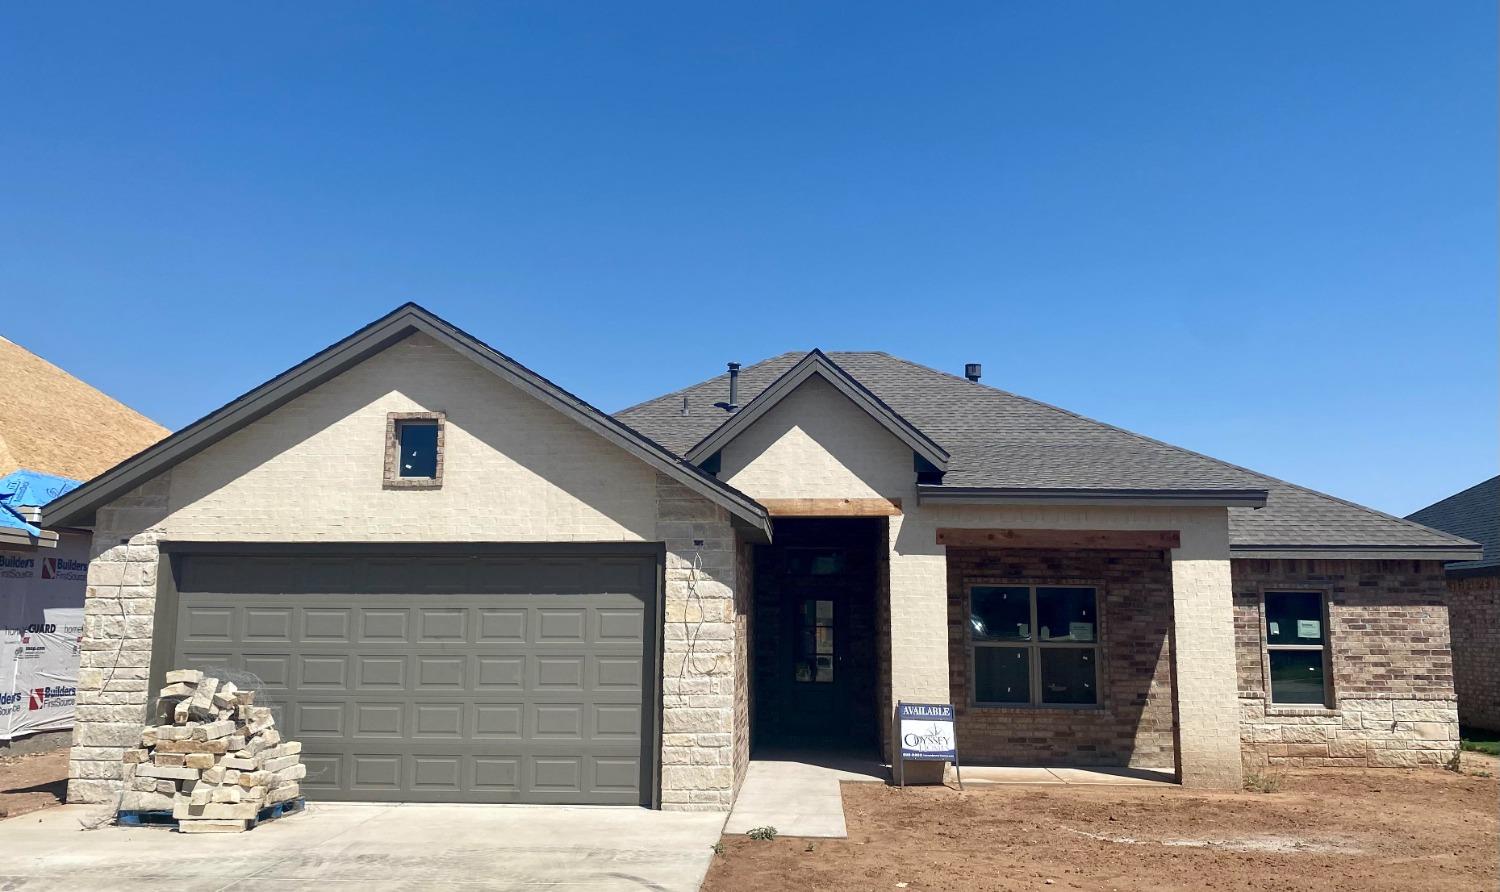 Brand new construction by Odyssey Homes in Hatton Place. The open floor plan features a large living room with a cathedral ceiling and a stone fireplace. It also features beautiful wood look tile throughout the entire main area, something you typically don't see in the price point. The master has a large walk in closet, double vanities and a special ceiling.  The home also includes a half bath off the main area for guests to use and a large covered back patio.